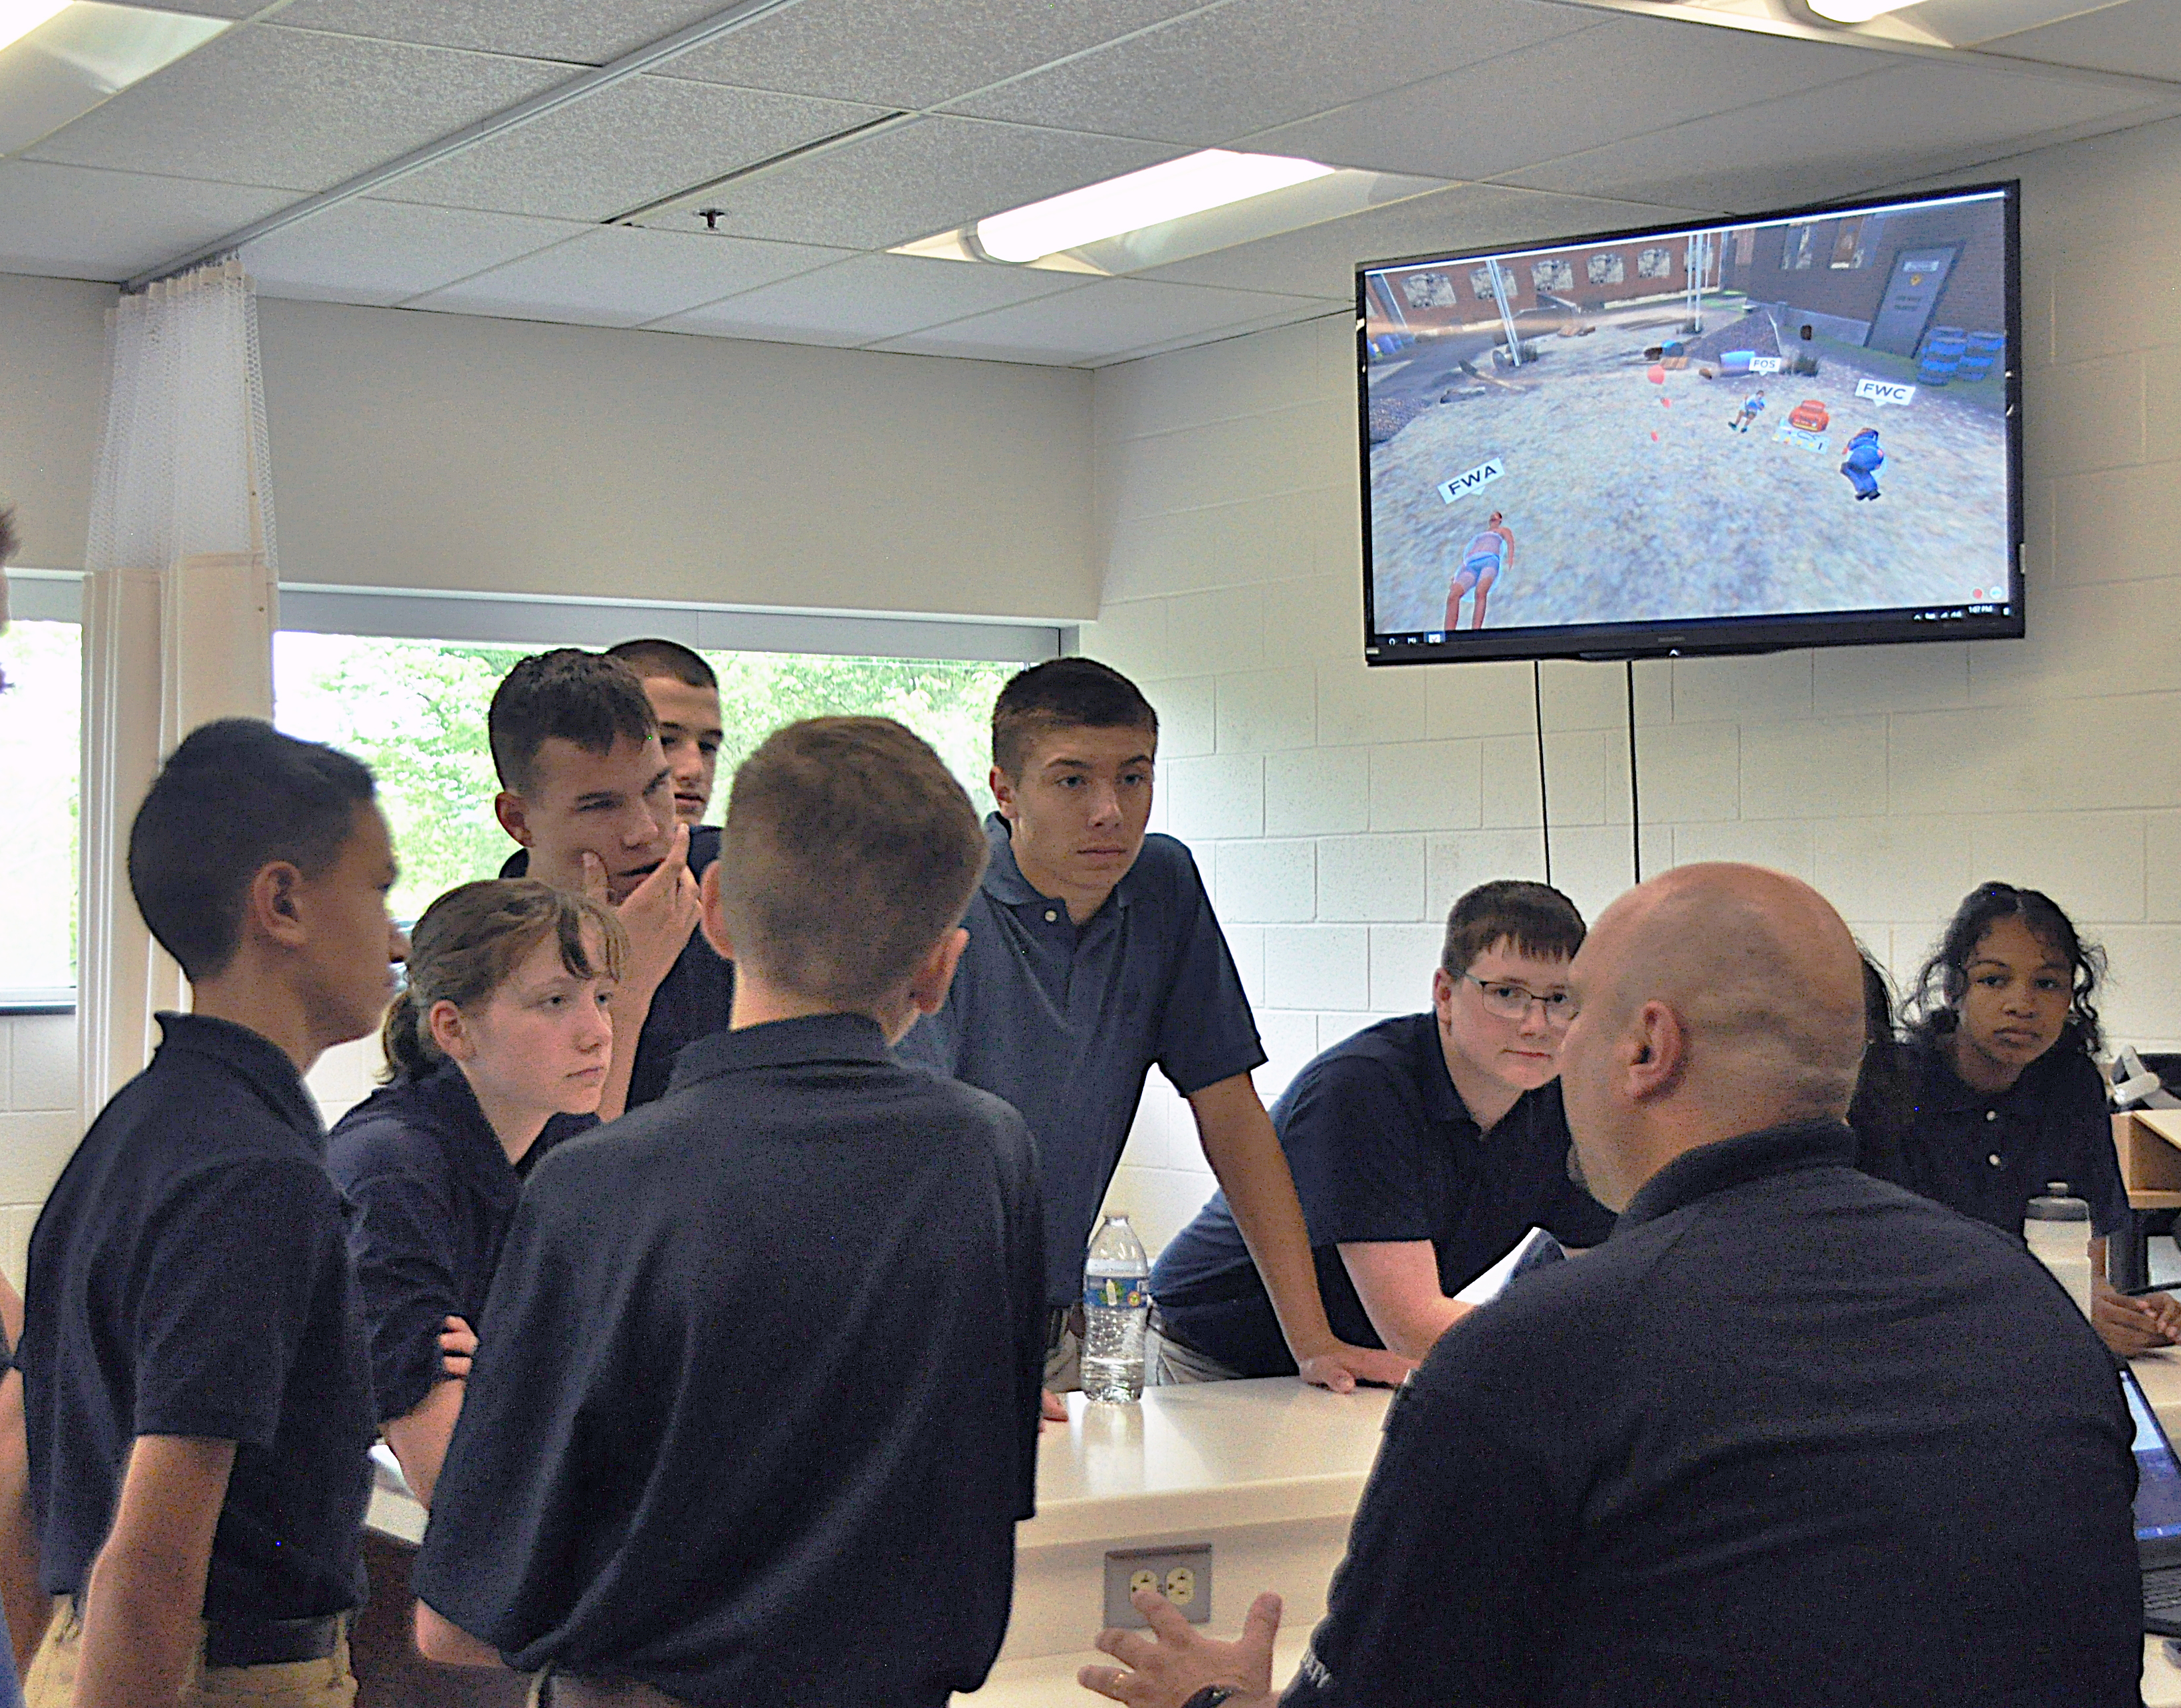 CAP cadets experience real world during STEM Academy visit